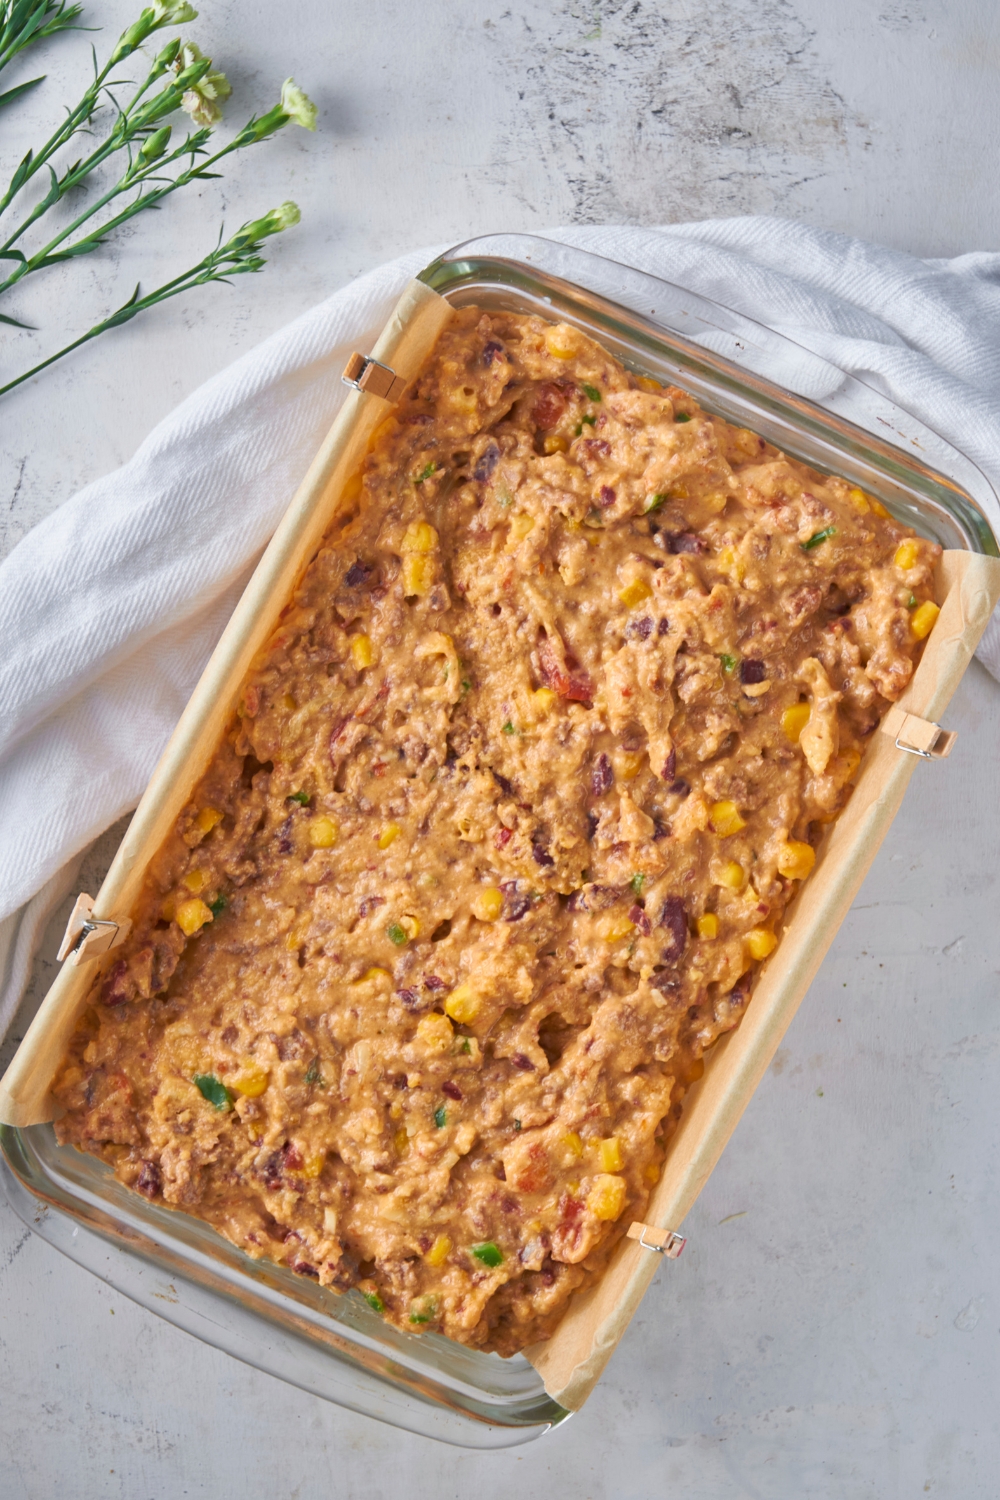 Clear baking dish lined with parchment paper filled with unbaked cowboy cornbread casserole.